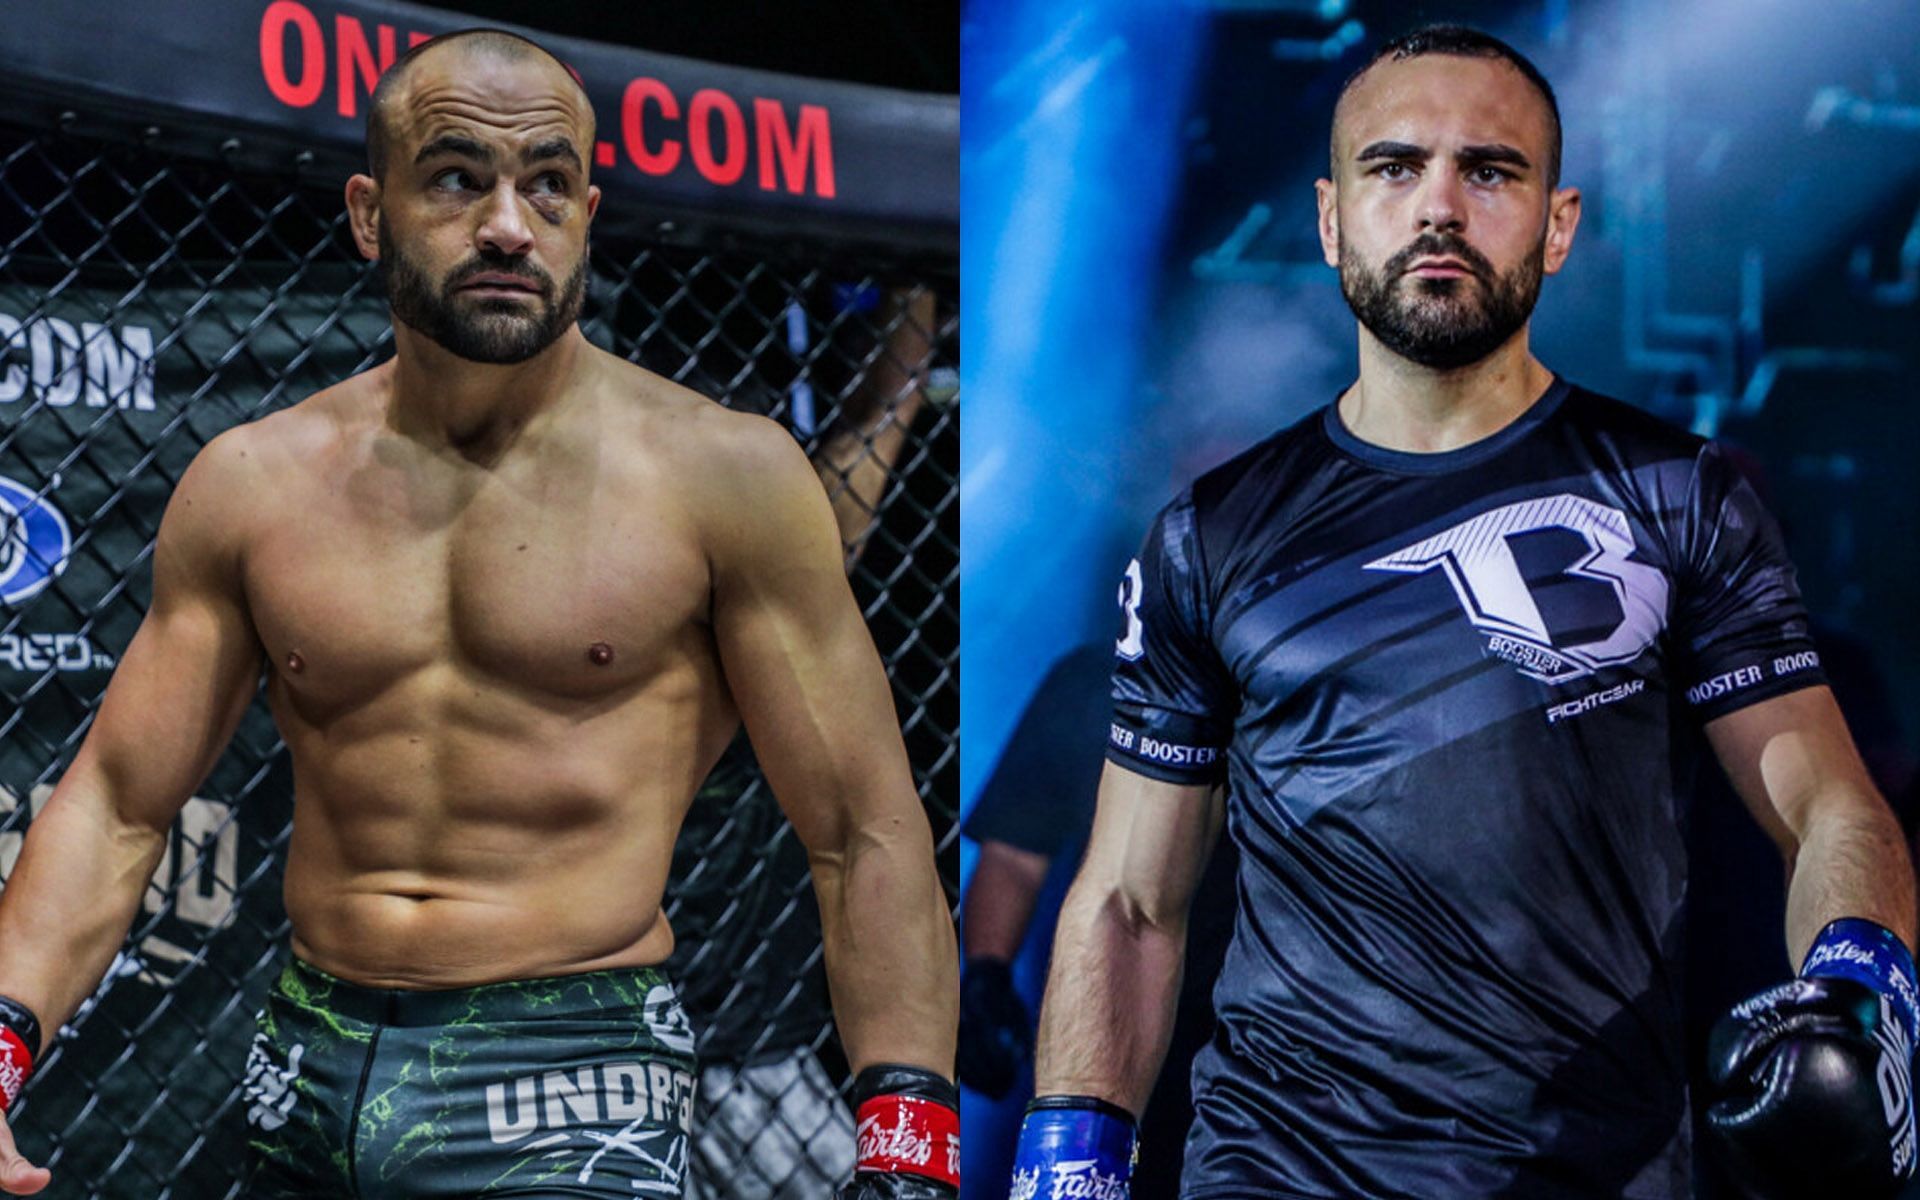 Arian Sadikovic (R) wants a special rules fight against Eddie Alvarez (L) in the future. | [Photos: ONE Championship]